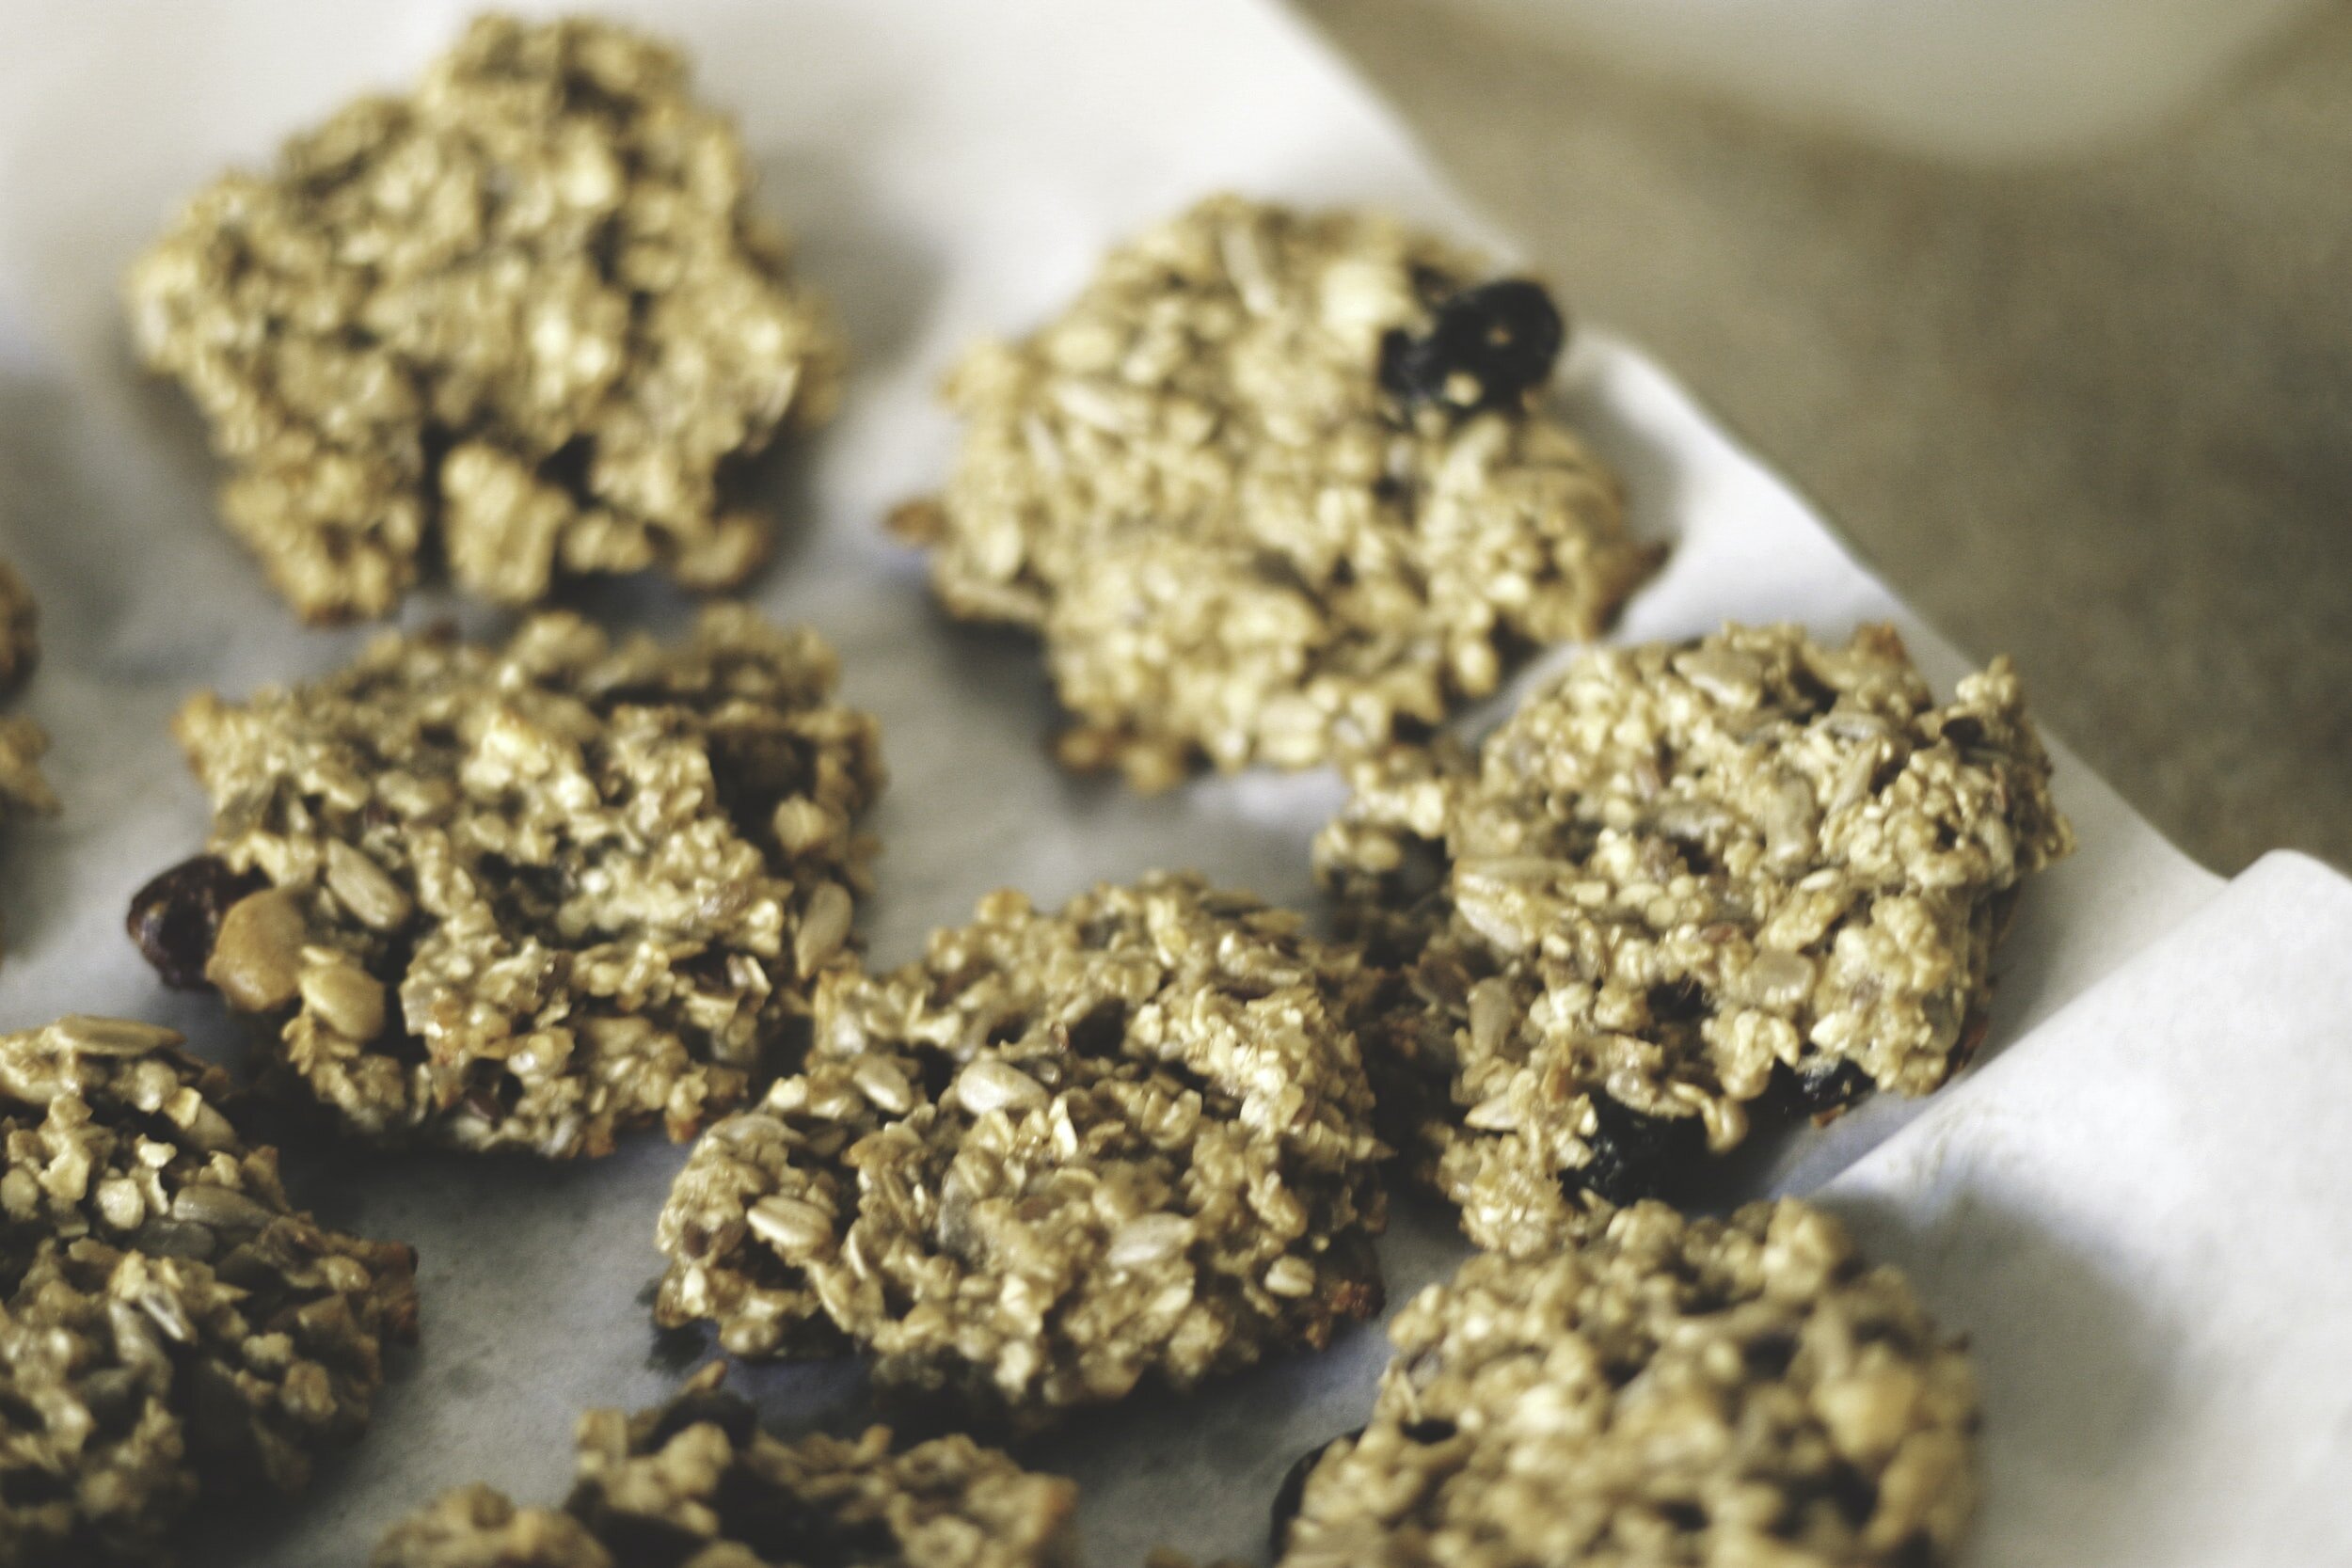 Another thing you can do with oatmeal is make cookies!